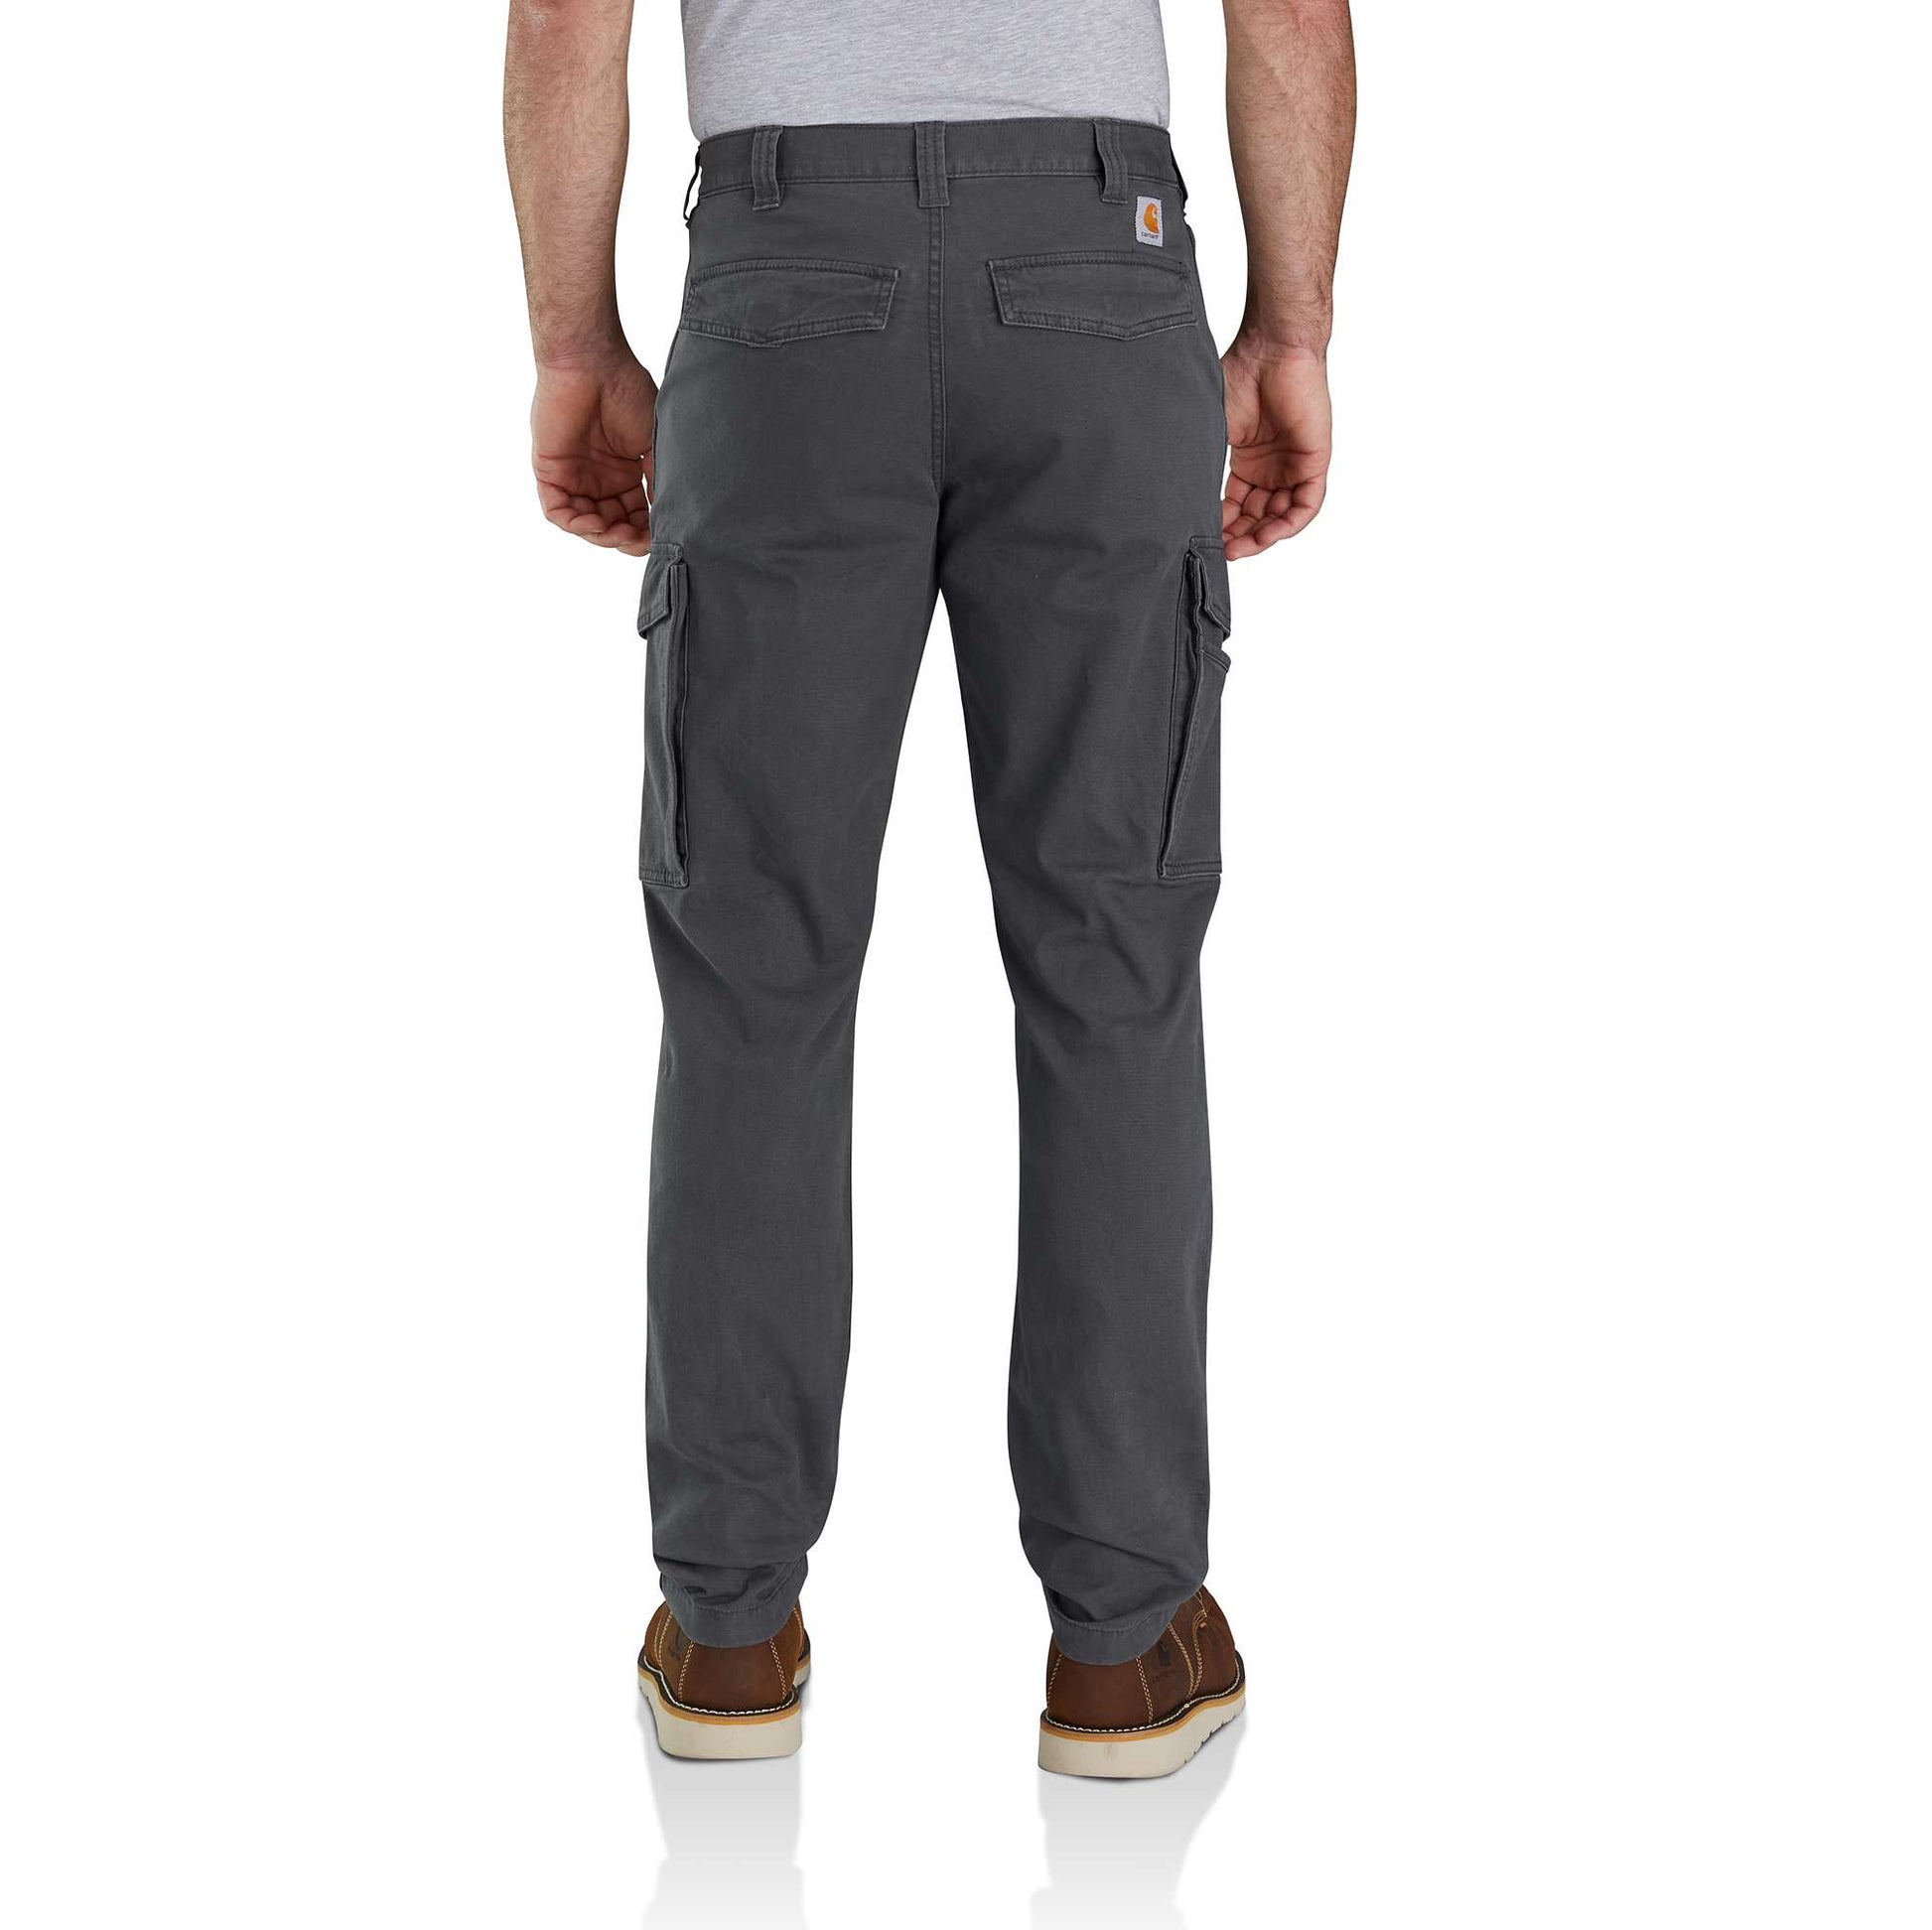 Carhartt Rugged Flex Relaxed Fit Canvas Cargo Work Pant